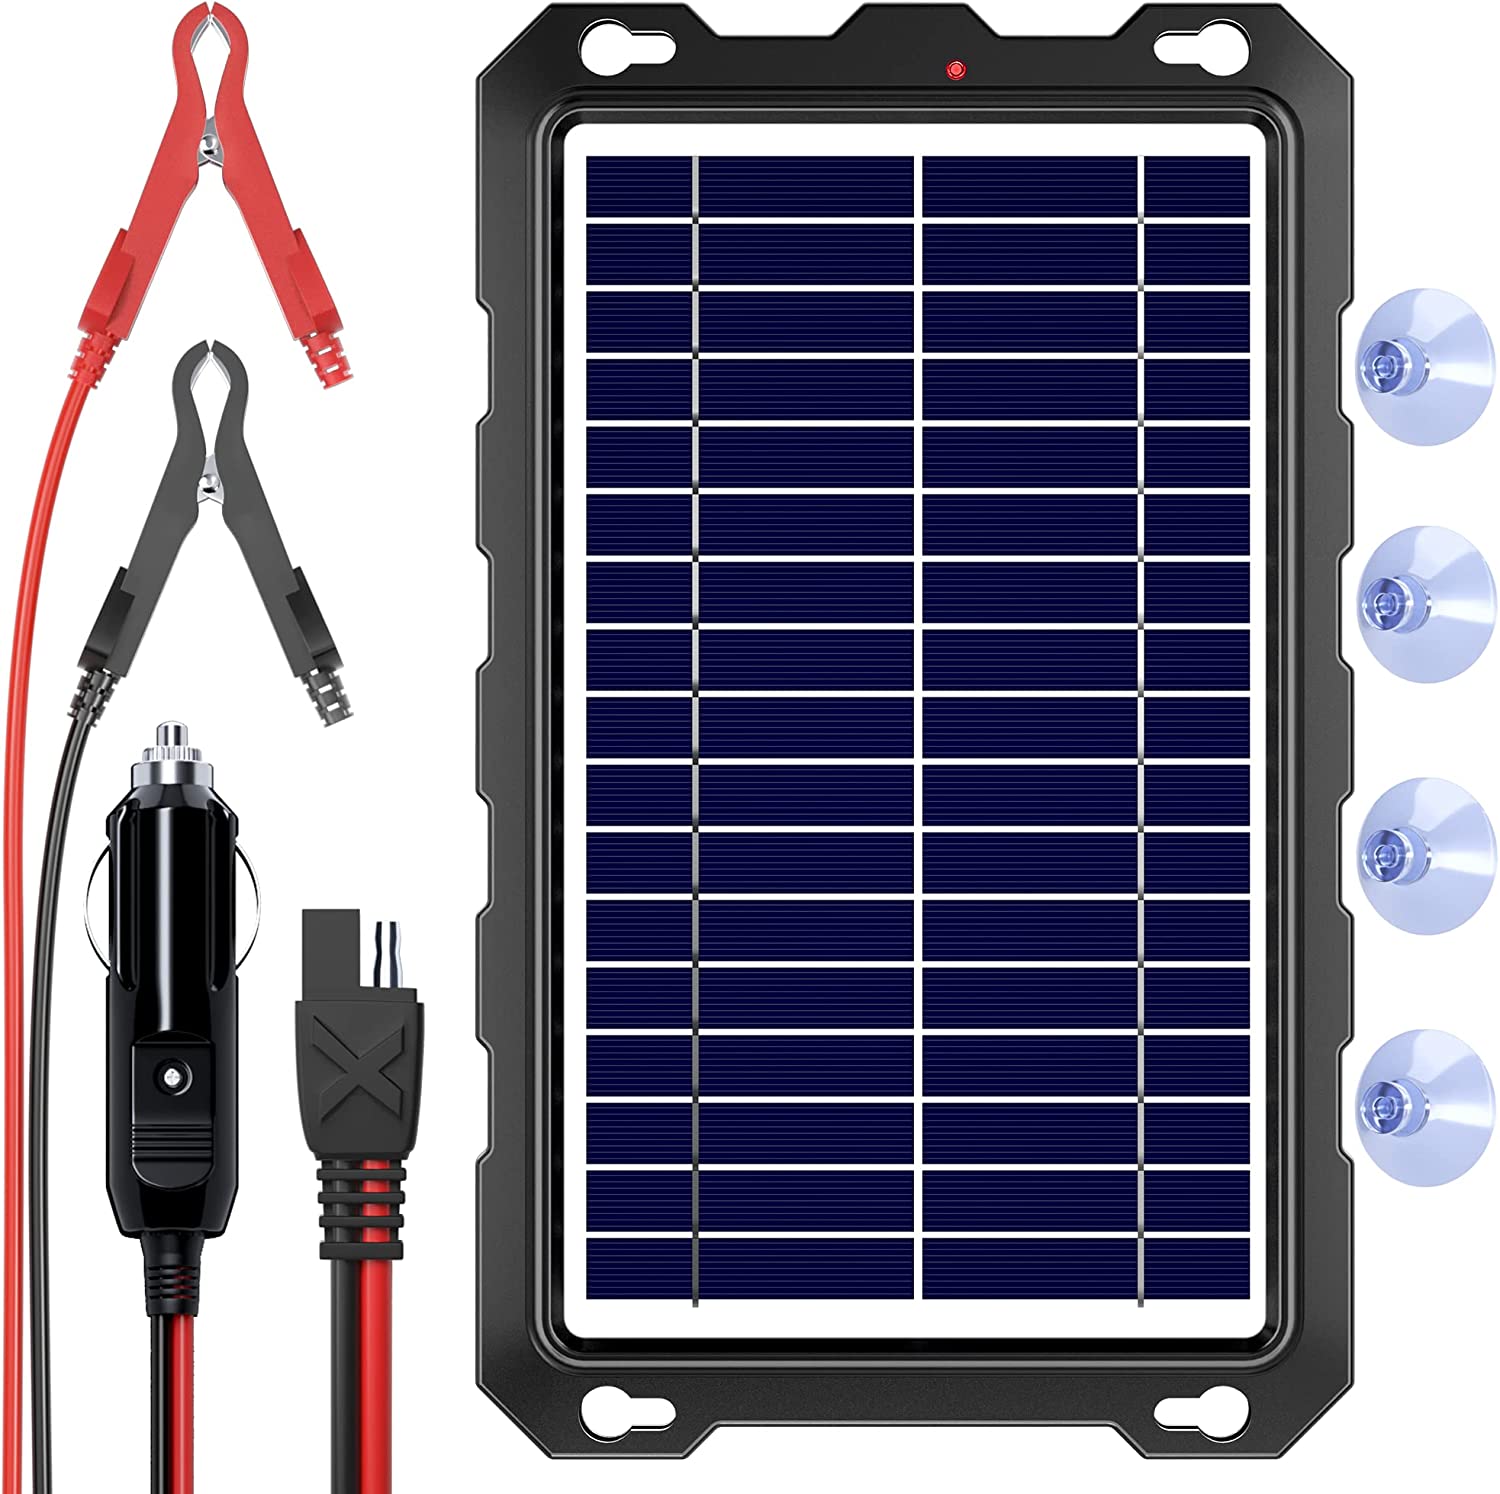 Upgraded 7.5W-Solar-Battery-Trickle-Charger-Maintainer-12V Portable Waterproof Solar Panel Trickle Charging Kit for Car, Automotive, Motorcycle, Boat, Marine, RV,Trailer,Powersports, Snowmobile, etc.